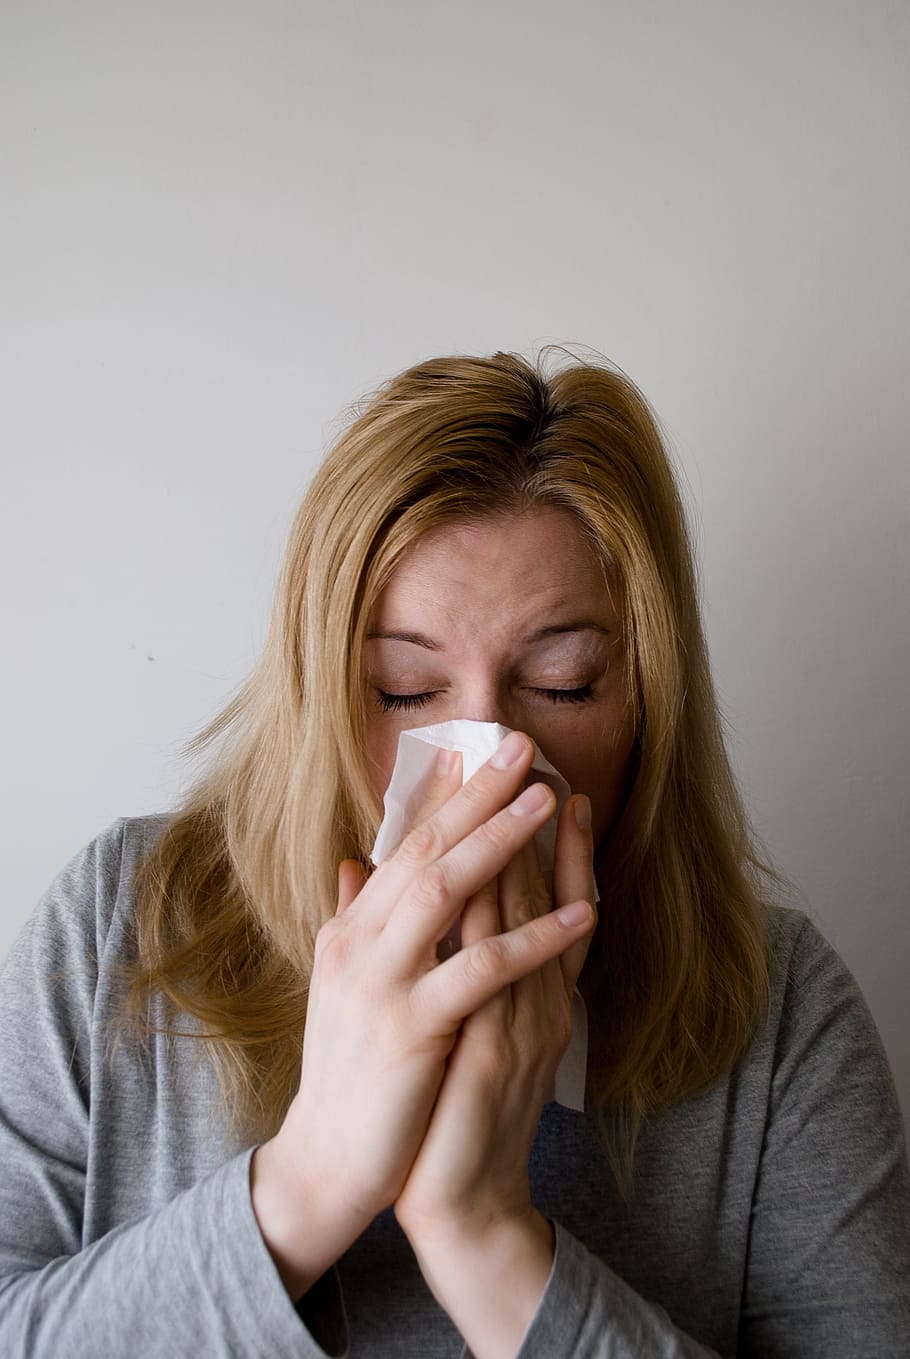 7 Pathologies Associated With Fever and Cough